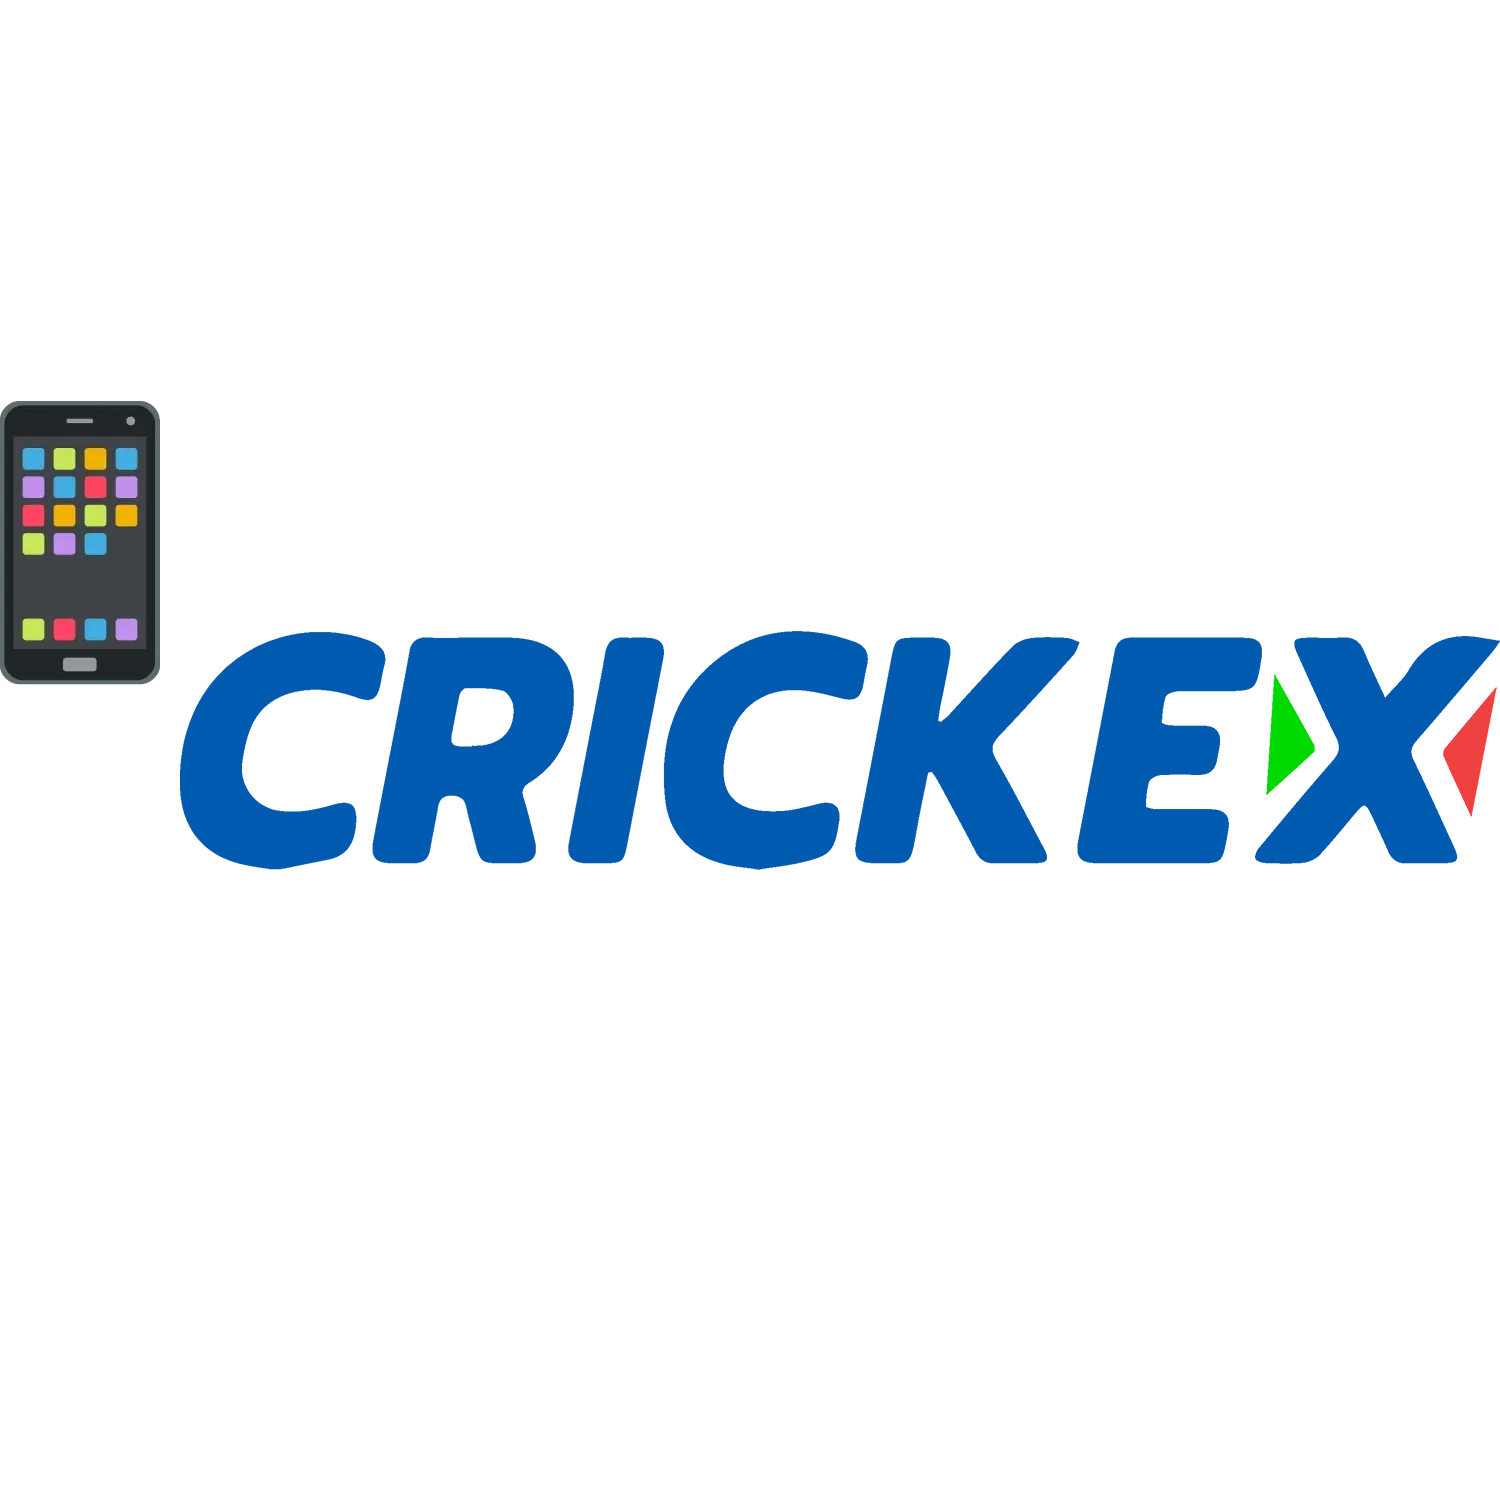 Crickex is a safe bookmaker for online betting in Bangladesh.